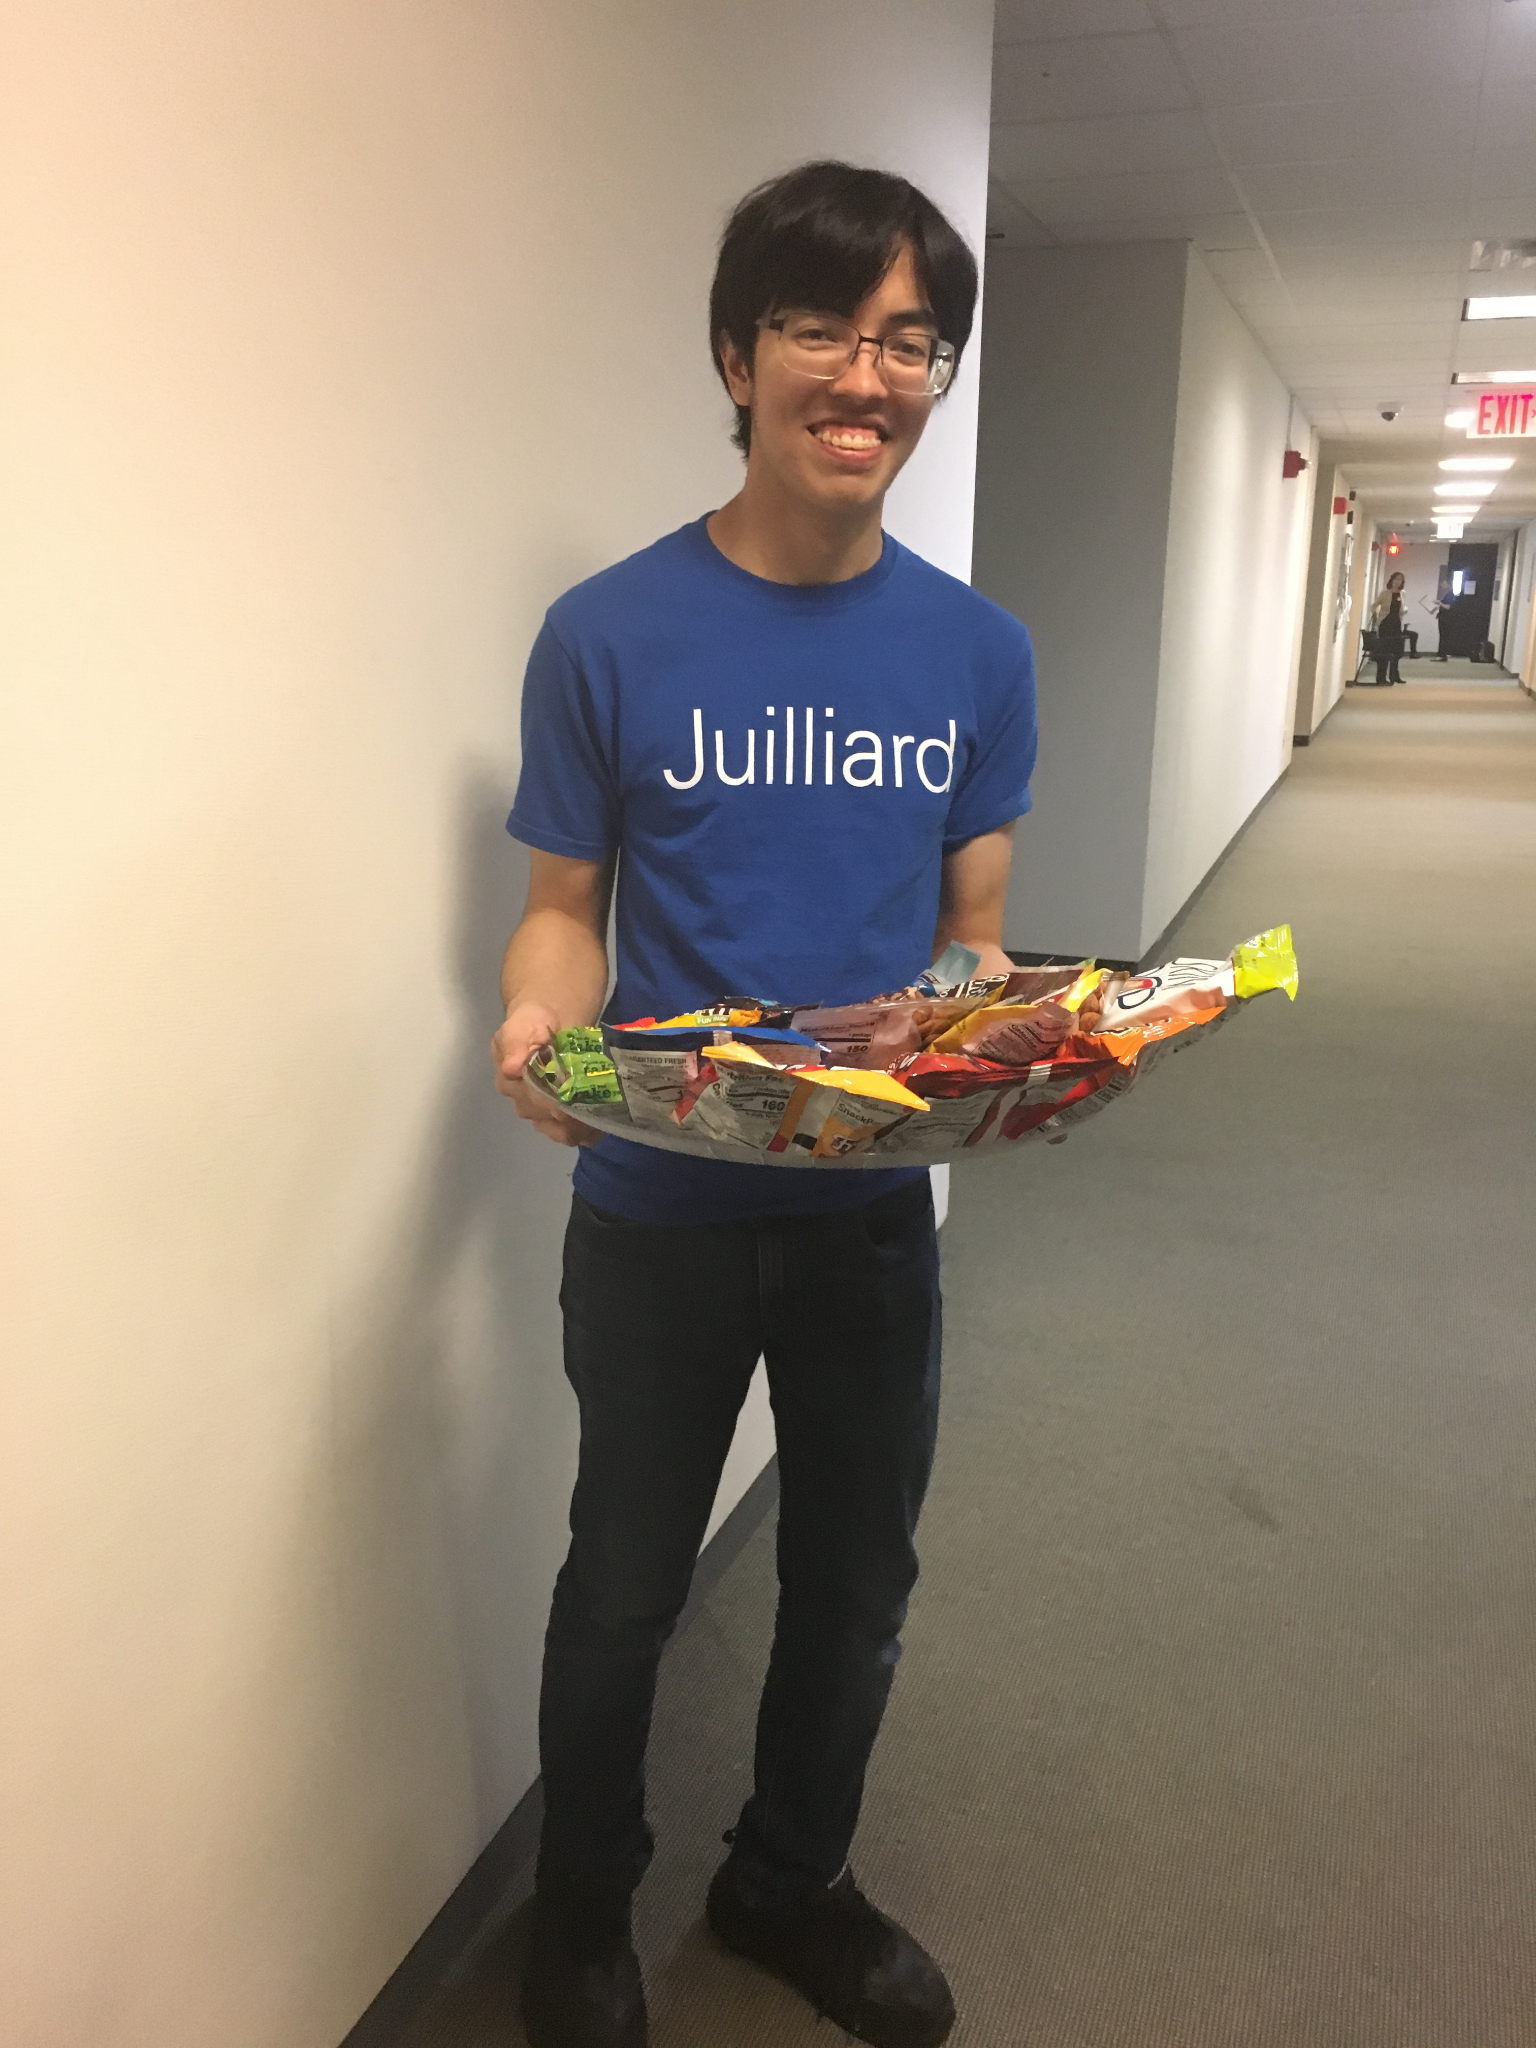 A student in a Juilliard t-shirt stands holding snacks